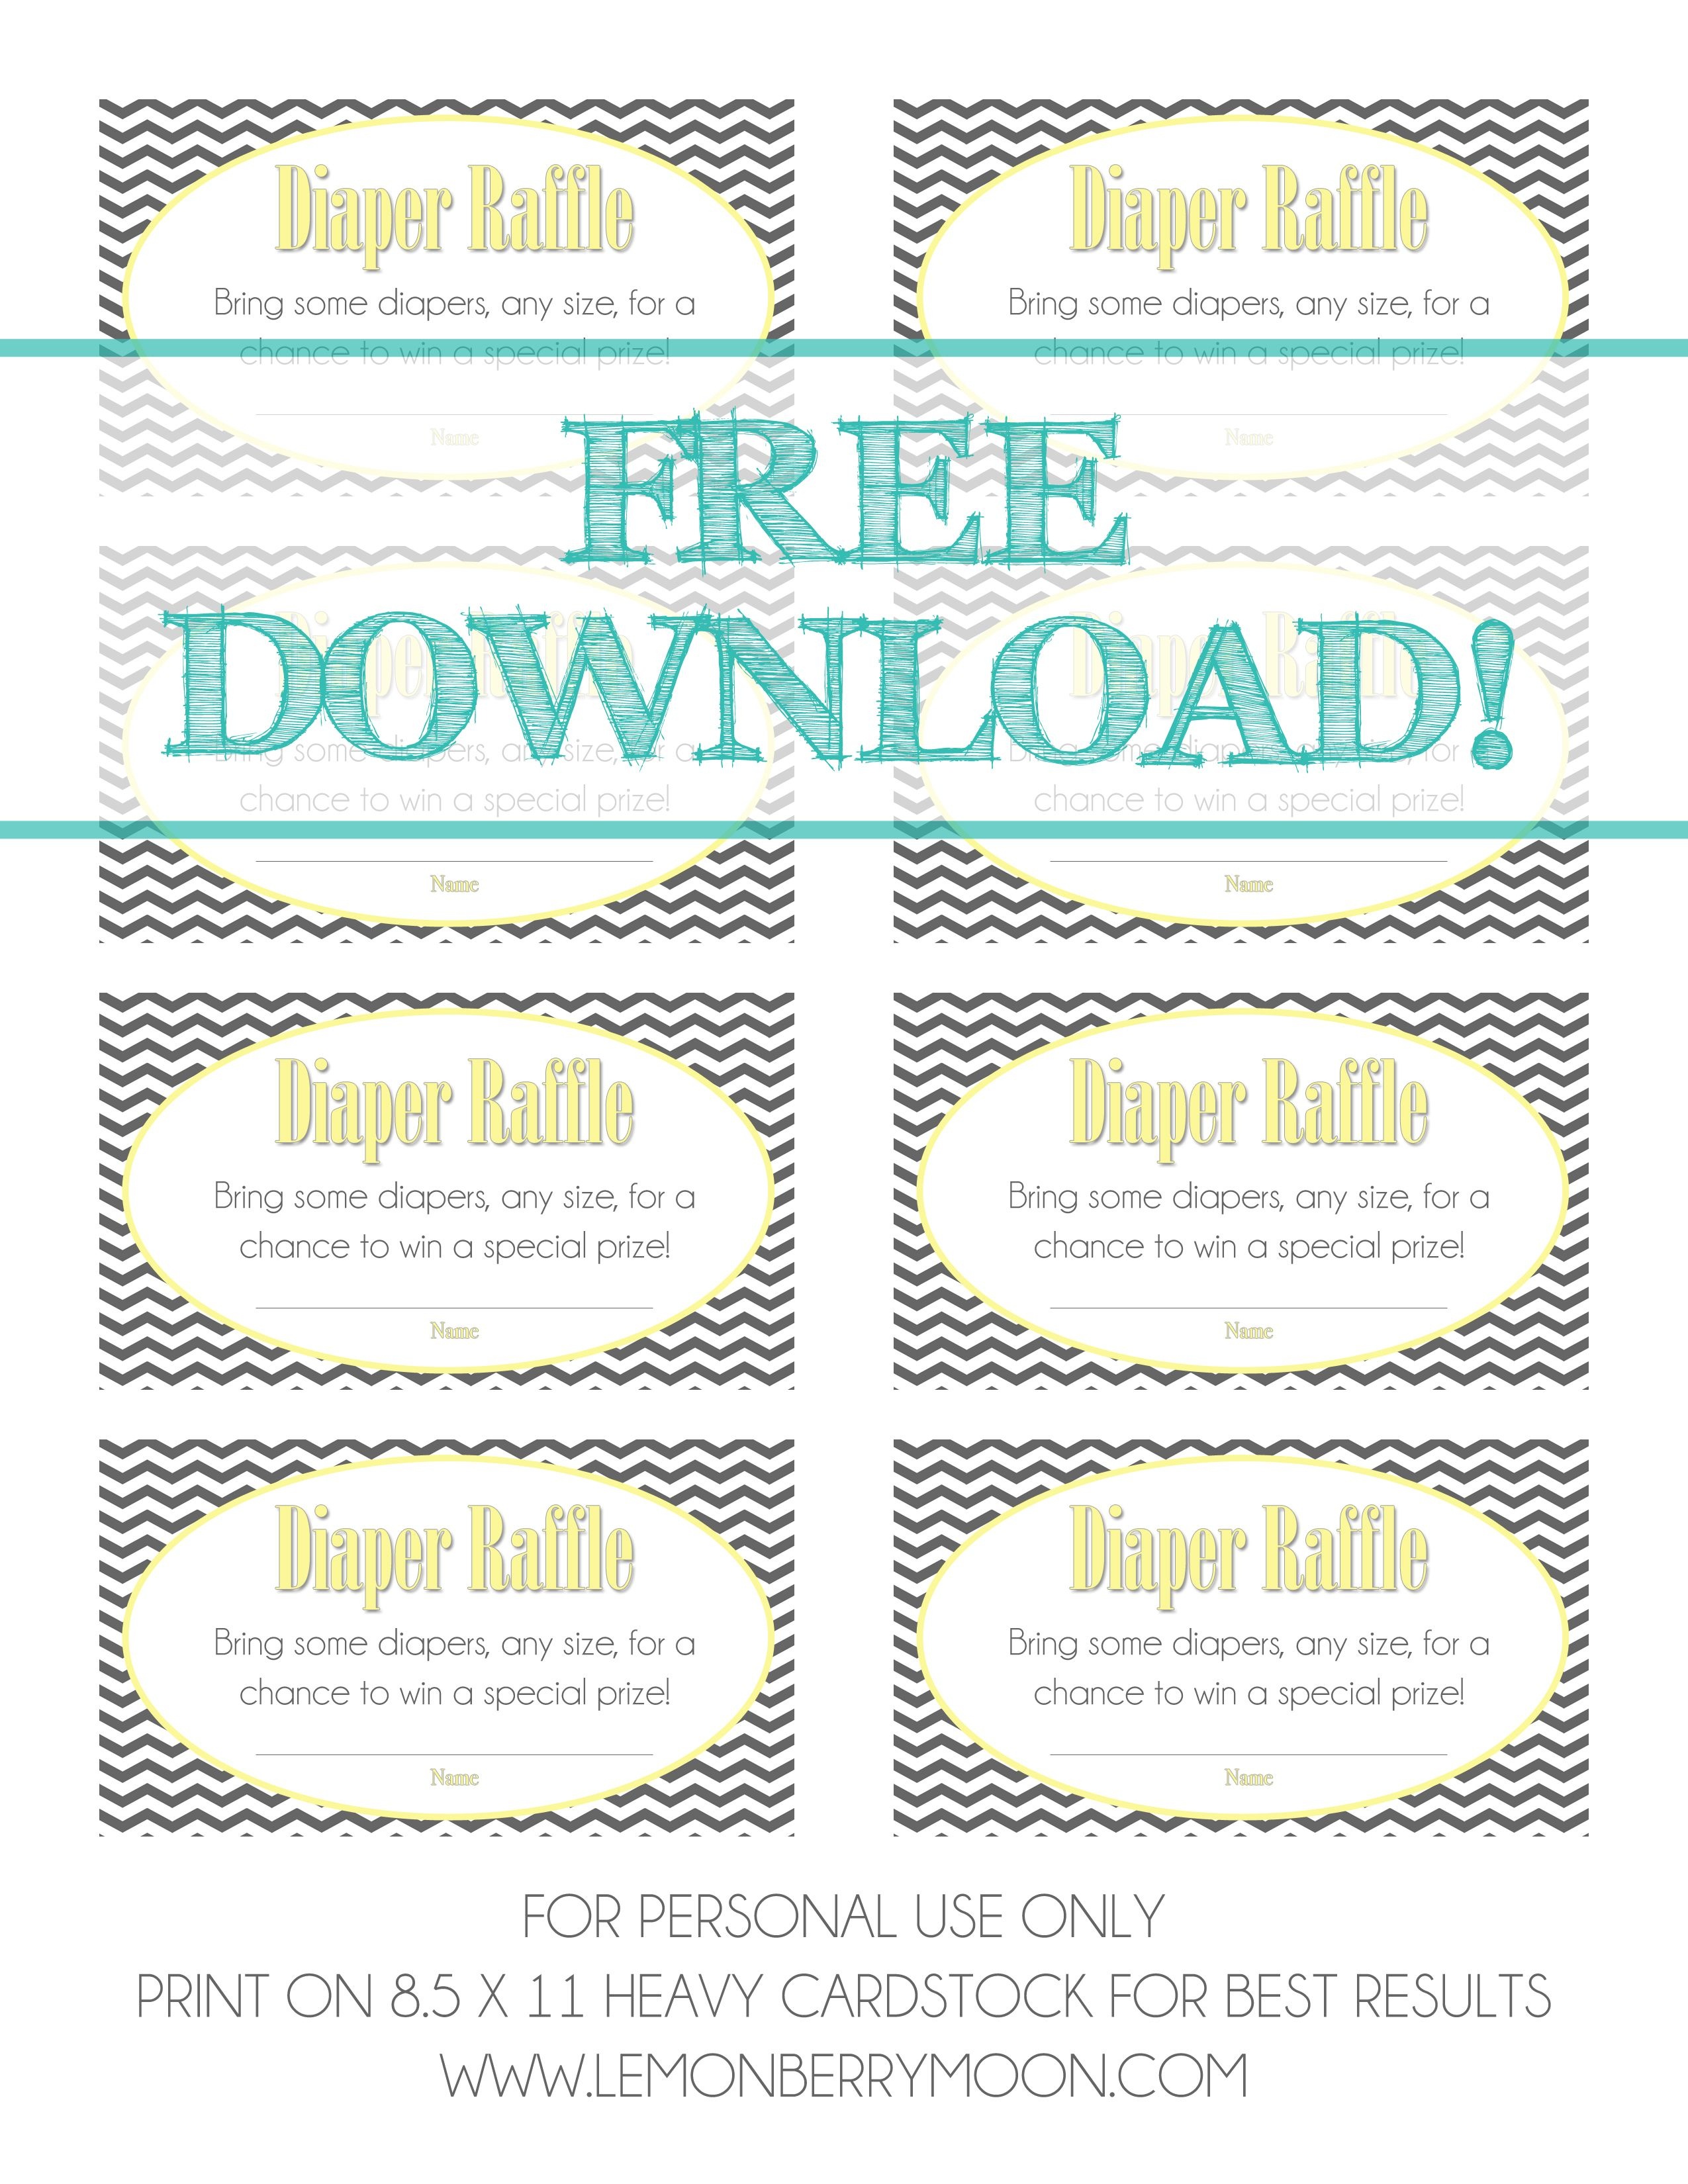 Free Download - Baby Diaper Raffle Template | Baaby Shower | Baby - Free Printable Diaper Raffle Ticket Template Download